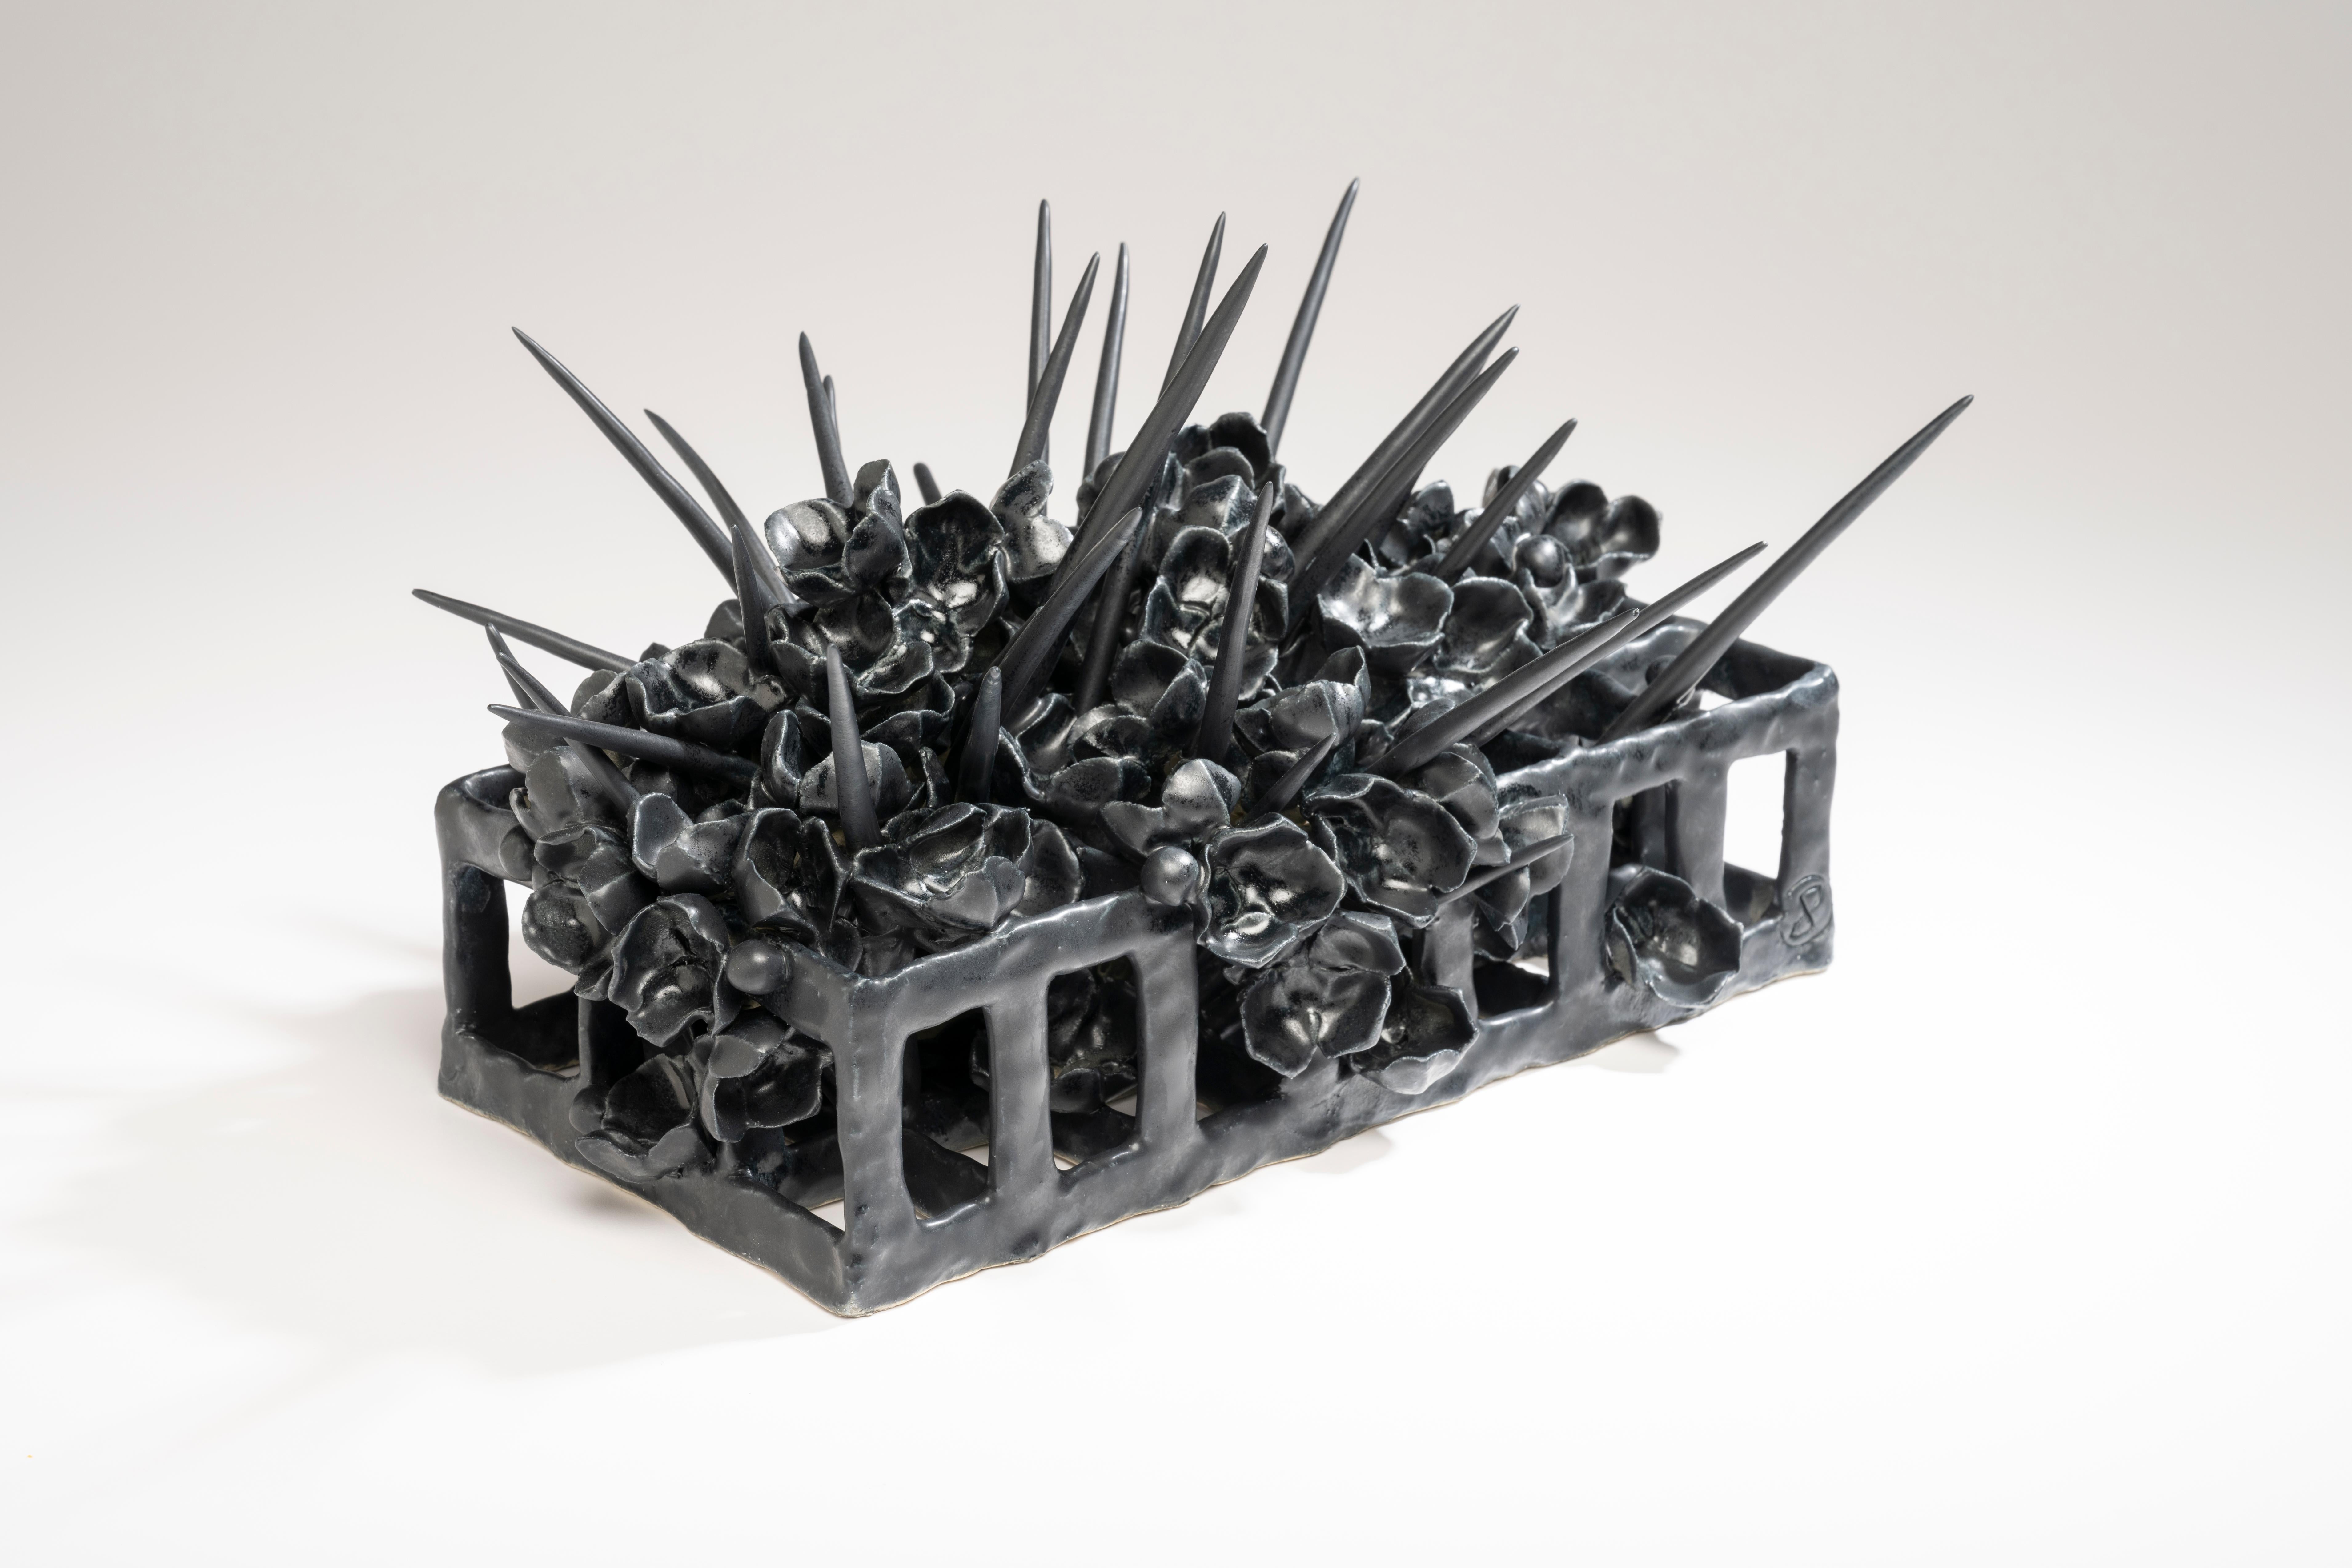 Contemporary American ceramic artist Joanna Poag's Binding Time (Black Grid with Quills) table top sculpture is part of a series. It's hand built clay, high fired to cone 6 with glaze. Binding Time explores entropy as it relates to personal